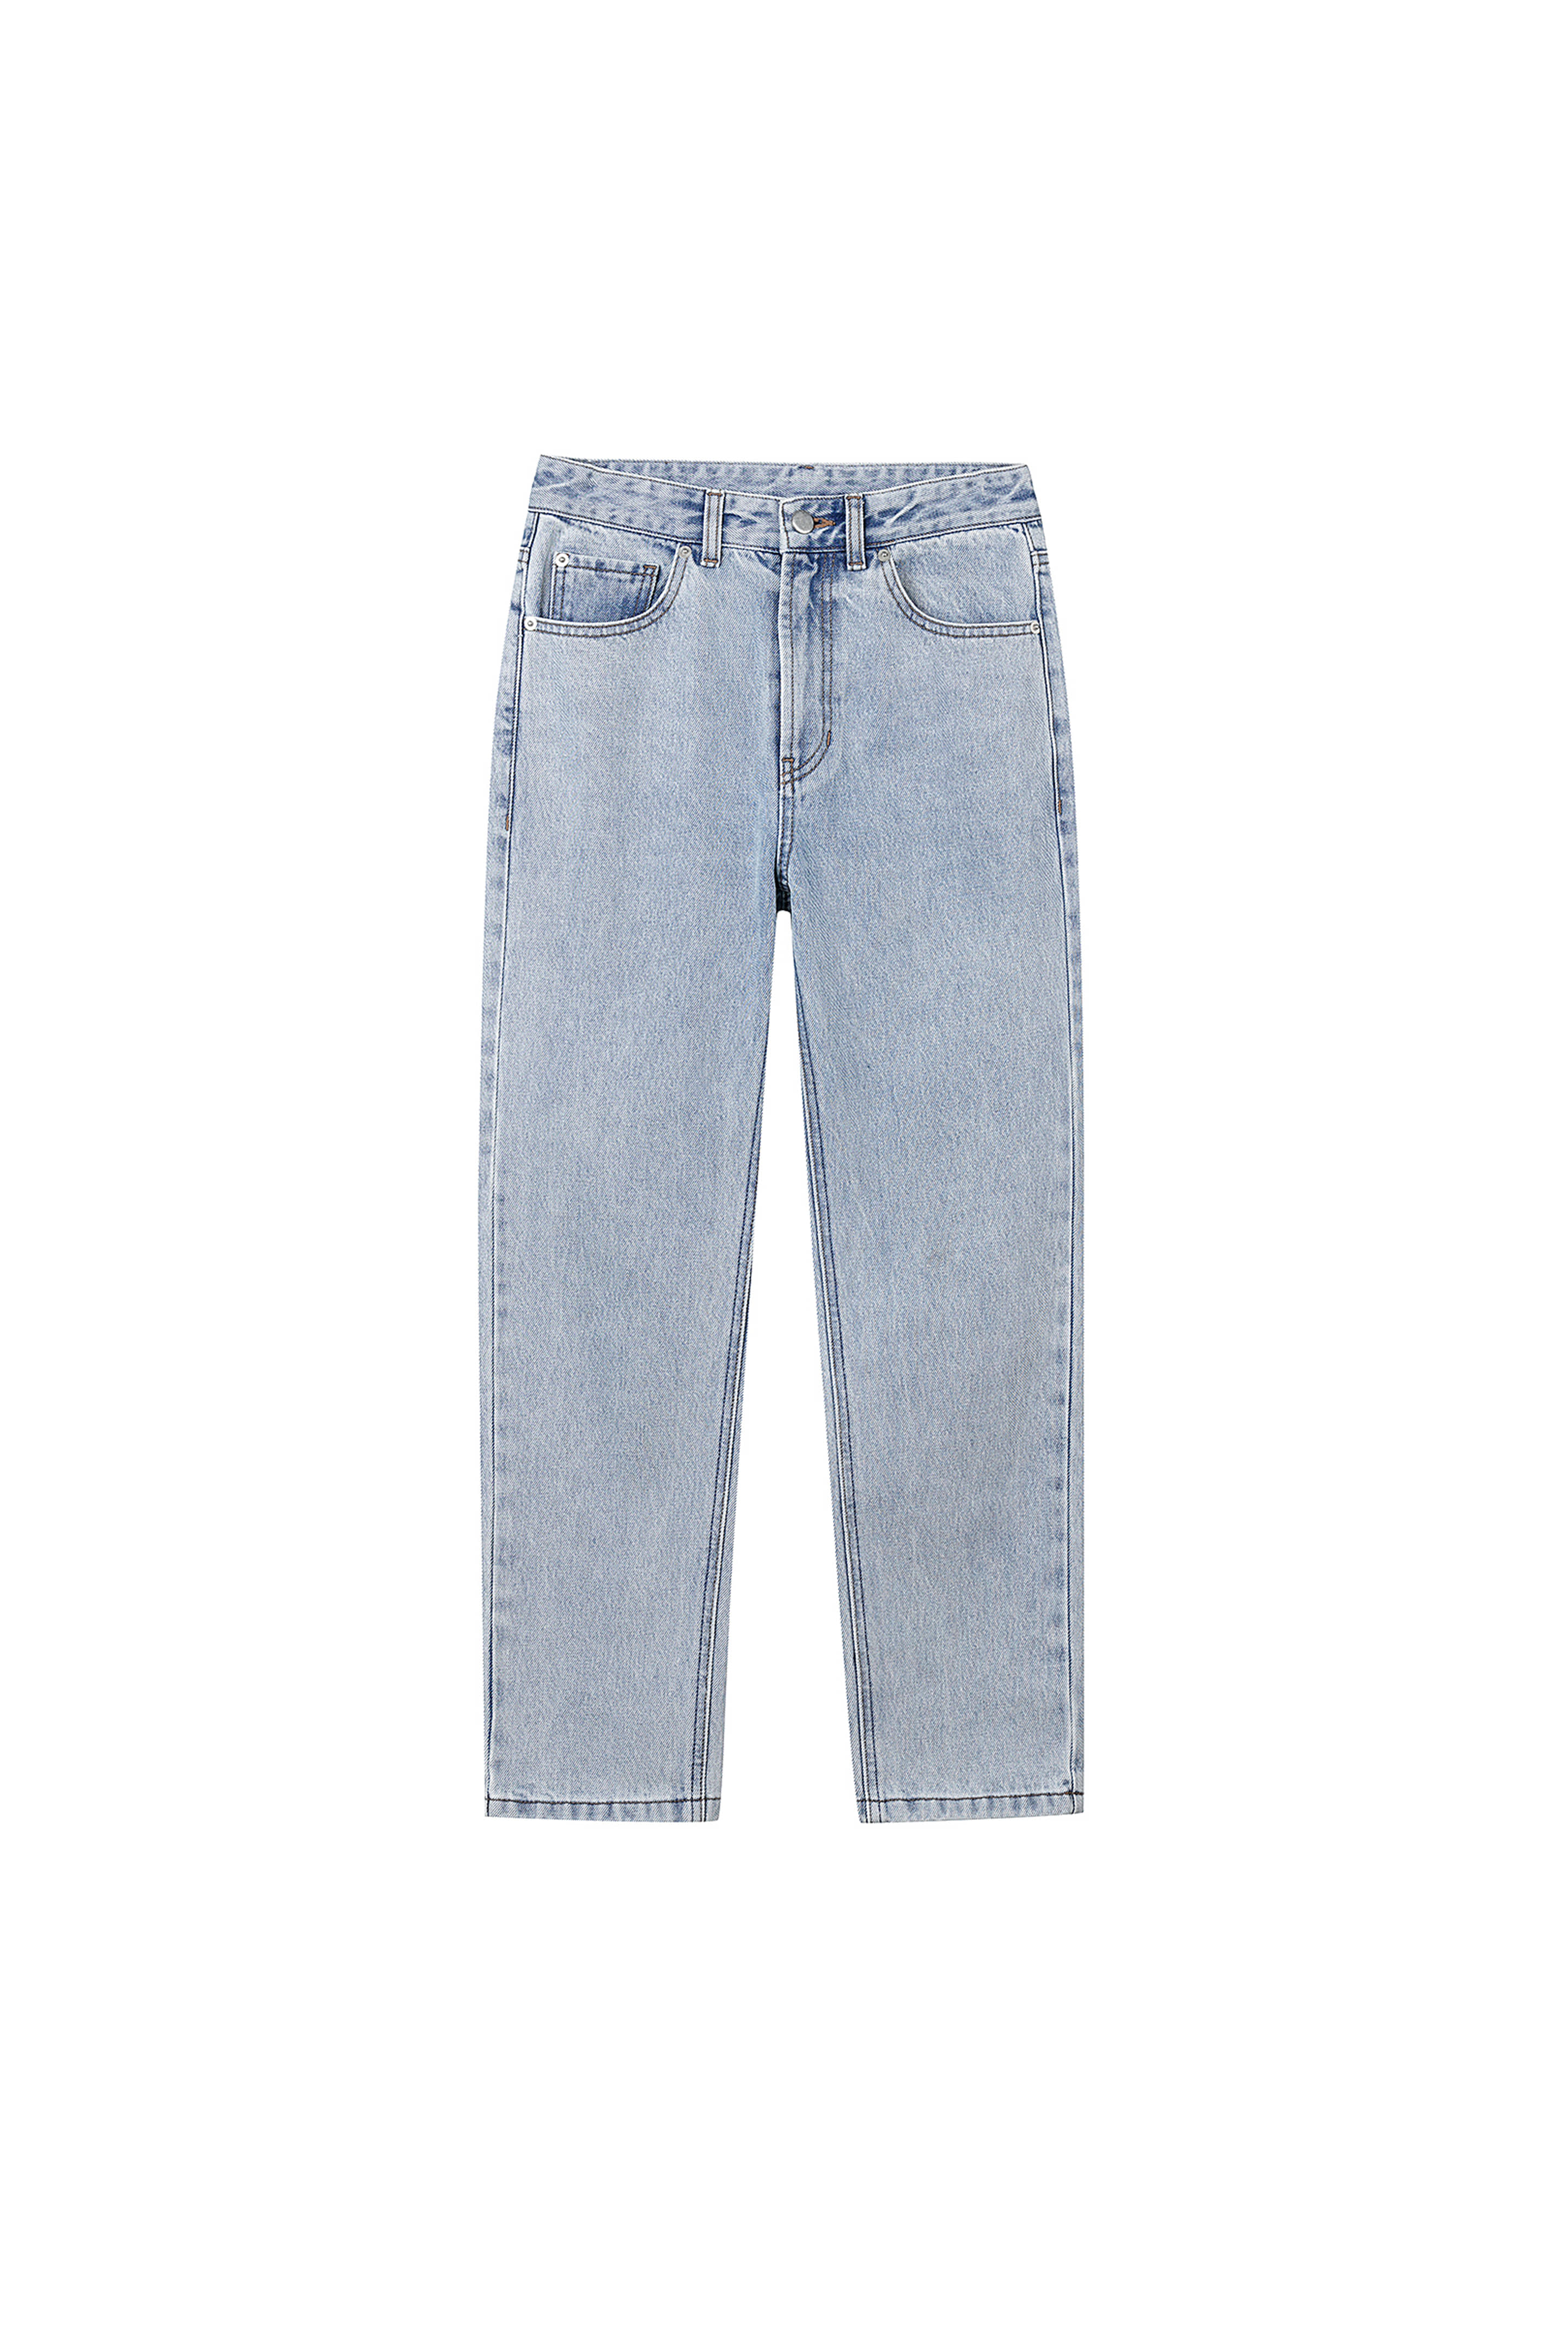 5th) Midrise Cropped Jeans Hand Brushed L.Blue